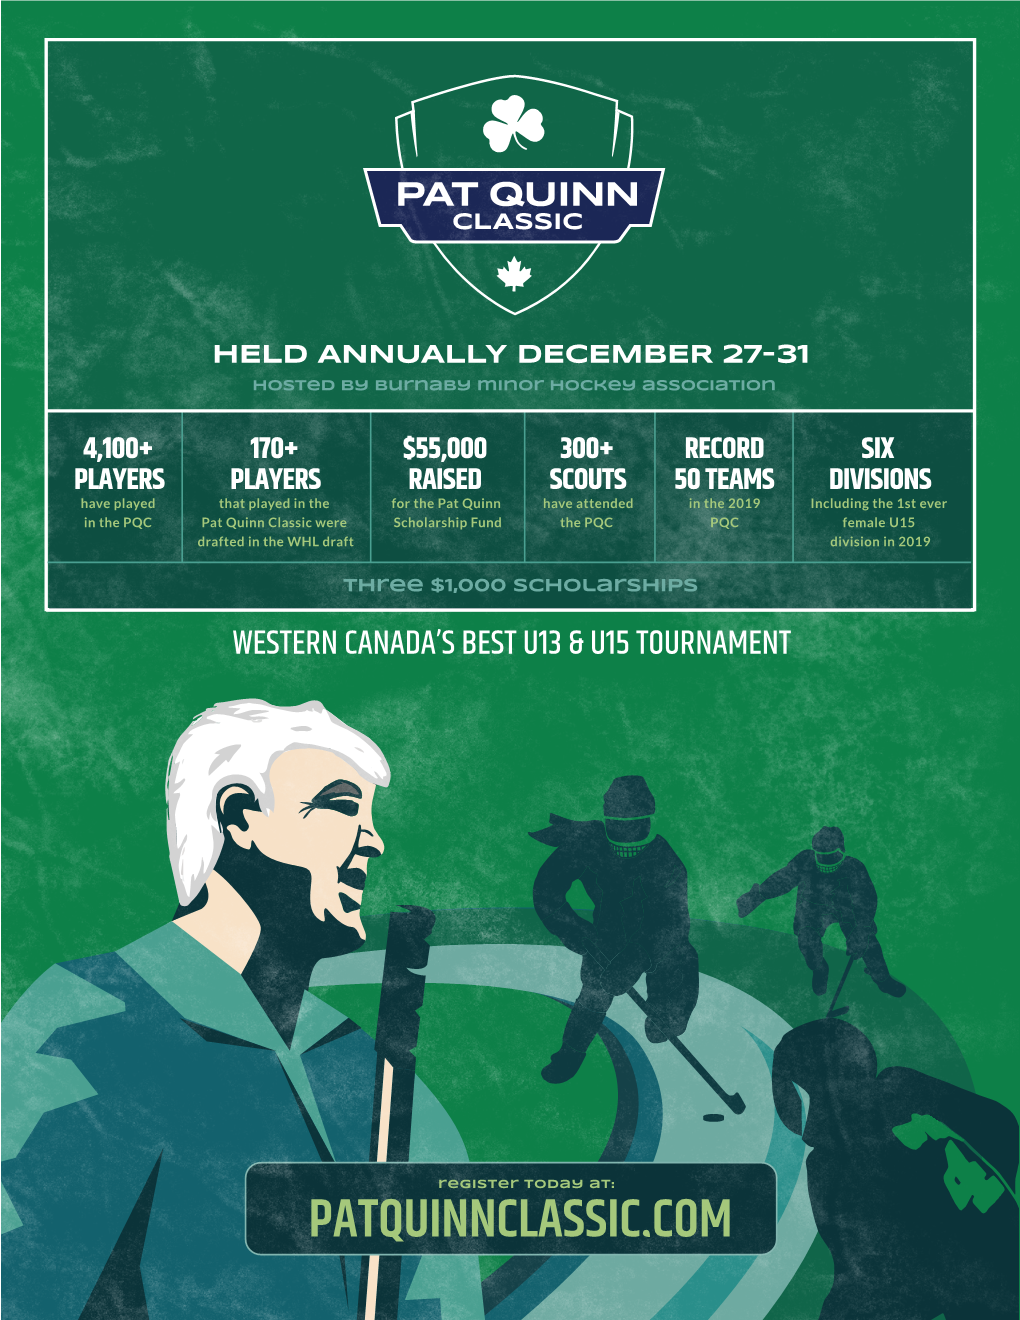 PATQUINNCLASSIC.COM DECEMBER 27 – 31, 2021 PAT QUINN CLASSIC There Are Few Leaders in Hockey As Respected As the Legendary Pat Quinn